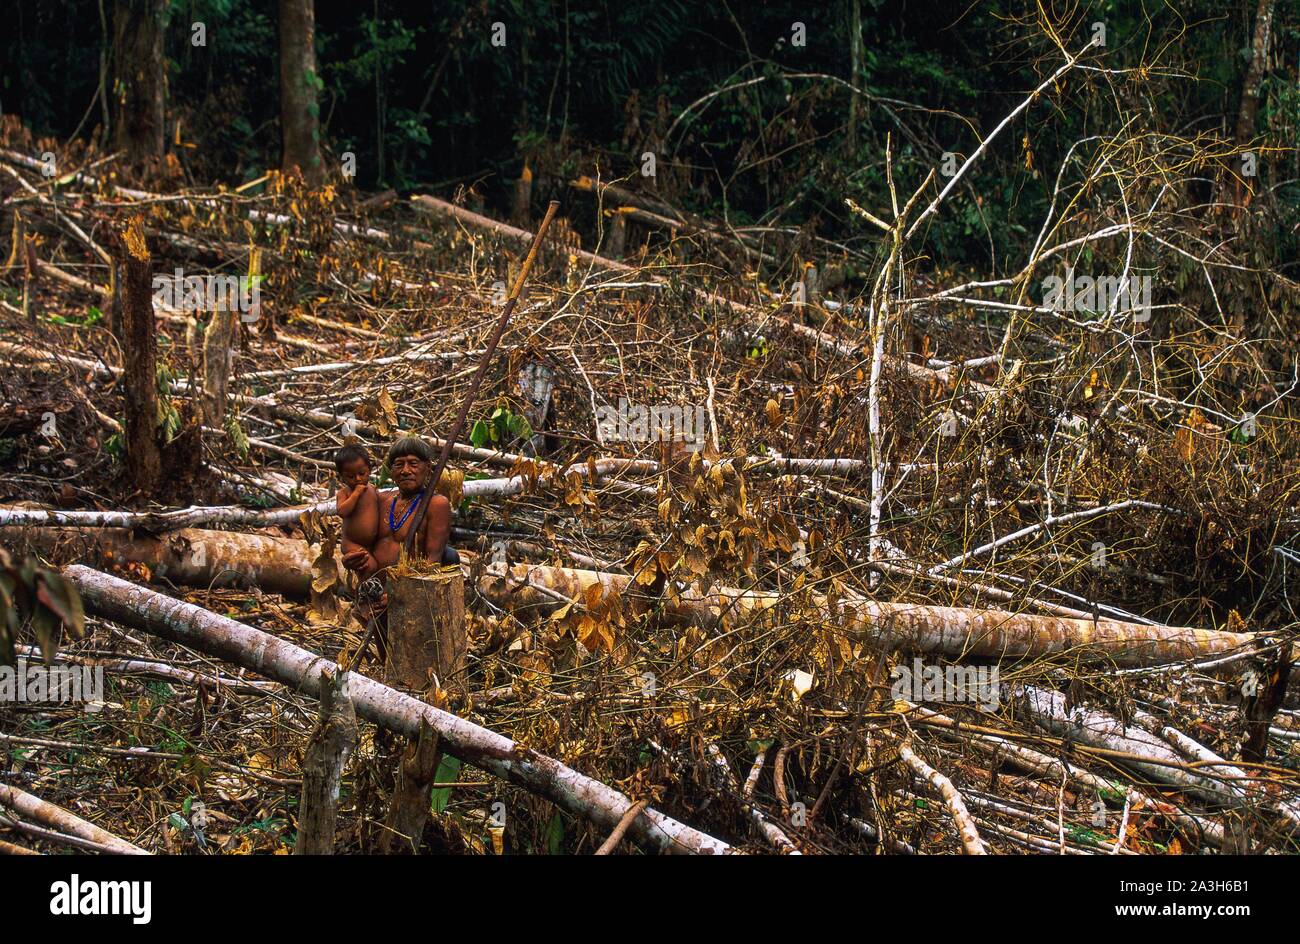 Ecuador, Orellana, Rio Cononaco, Destruction of their habitat by foresters and oil companies, the Huaorani are one of the last two tribes of hunter-gatherers who live in the heart of the rainforest of Ecuador Stock Photo